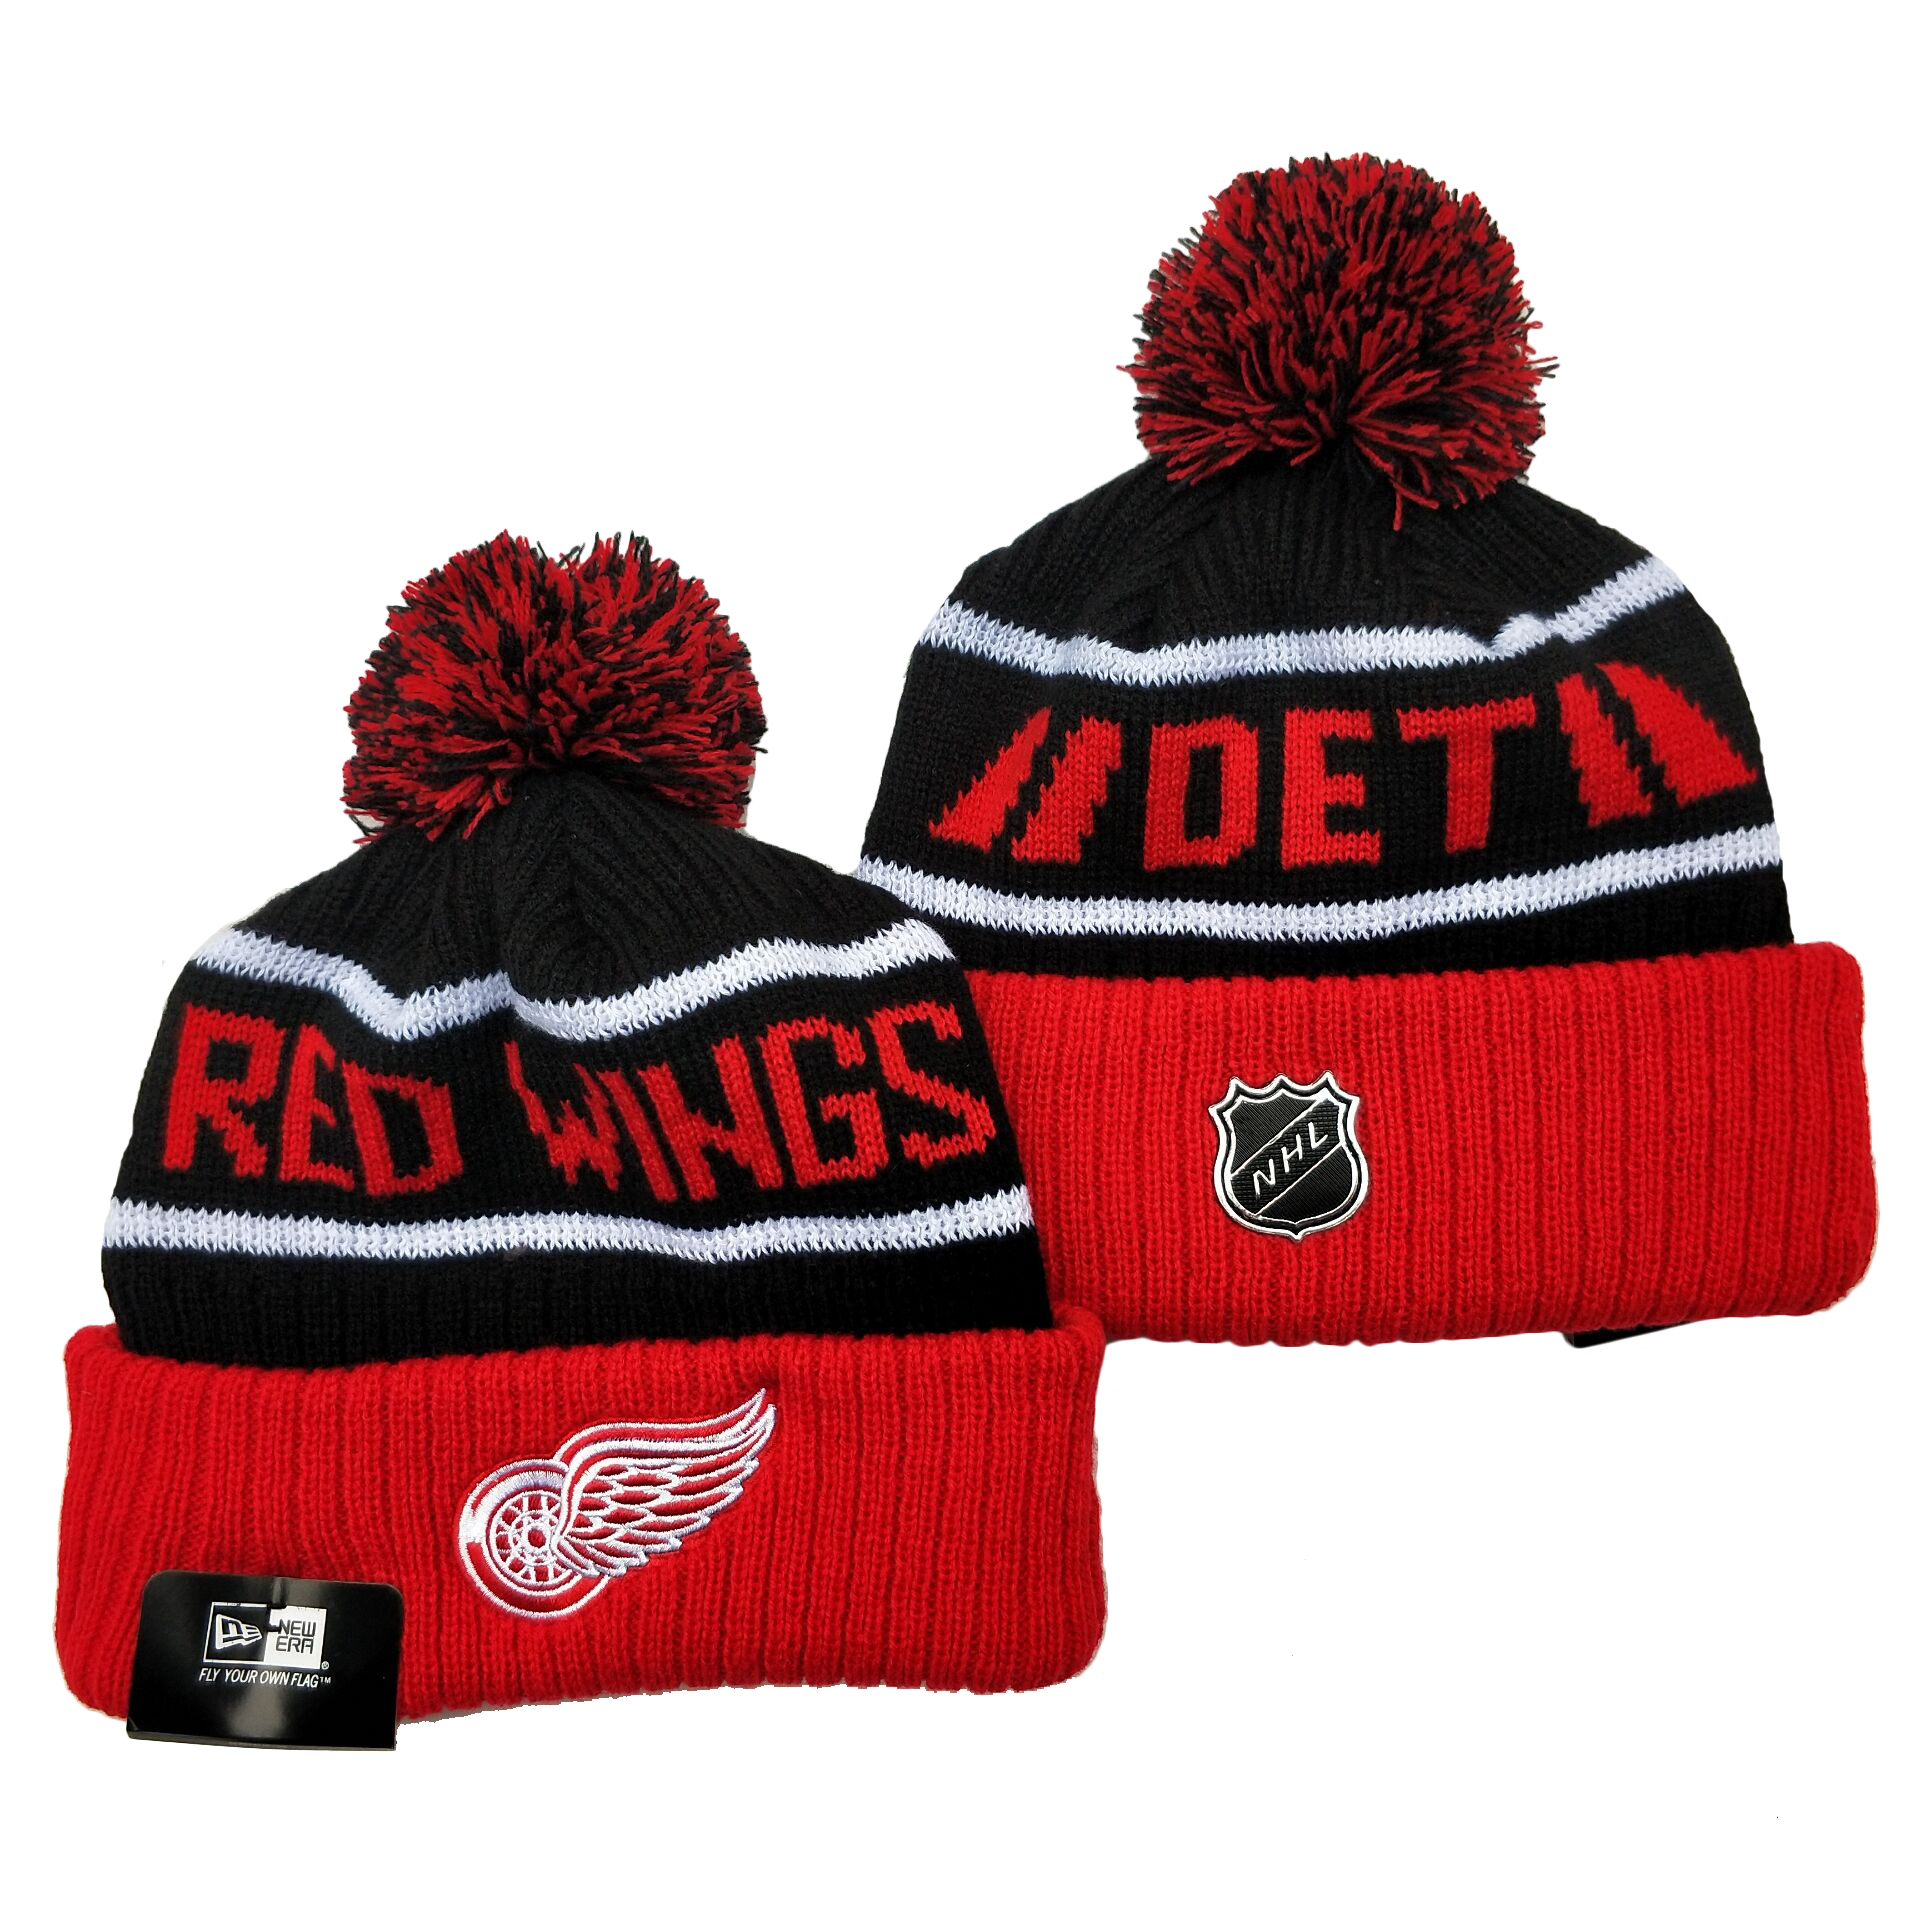 Detroit Red Wings Knit Hats 002